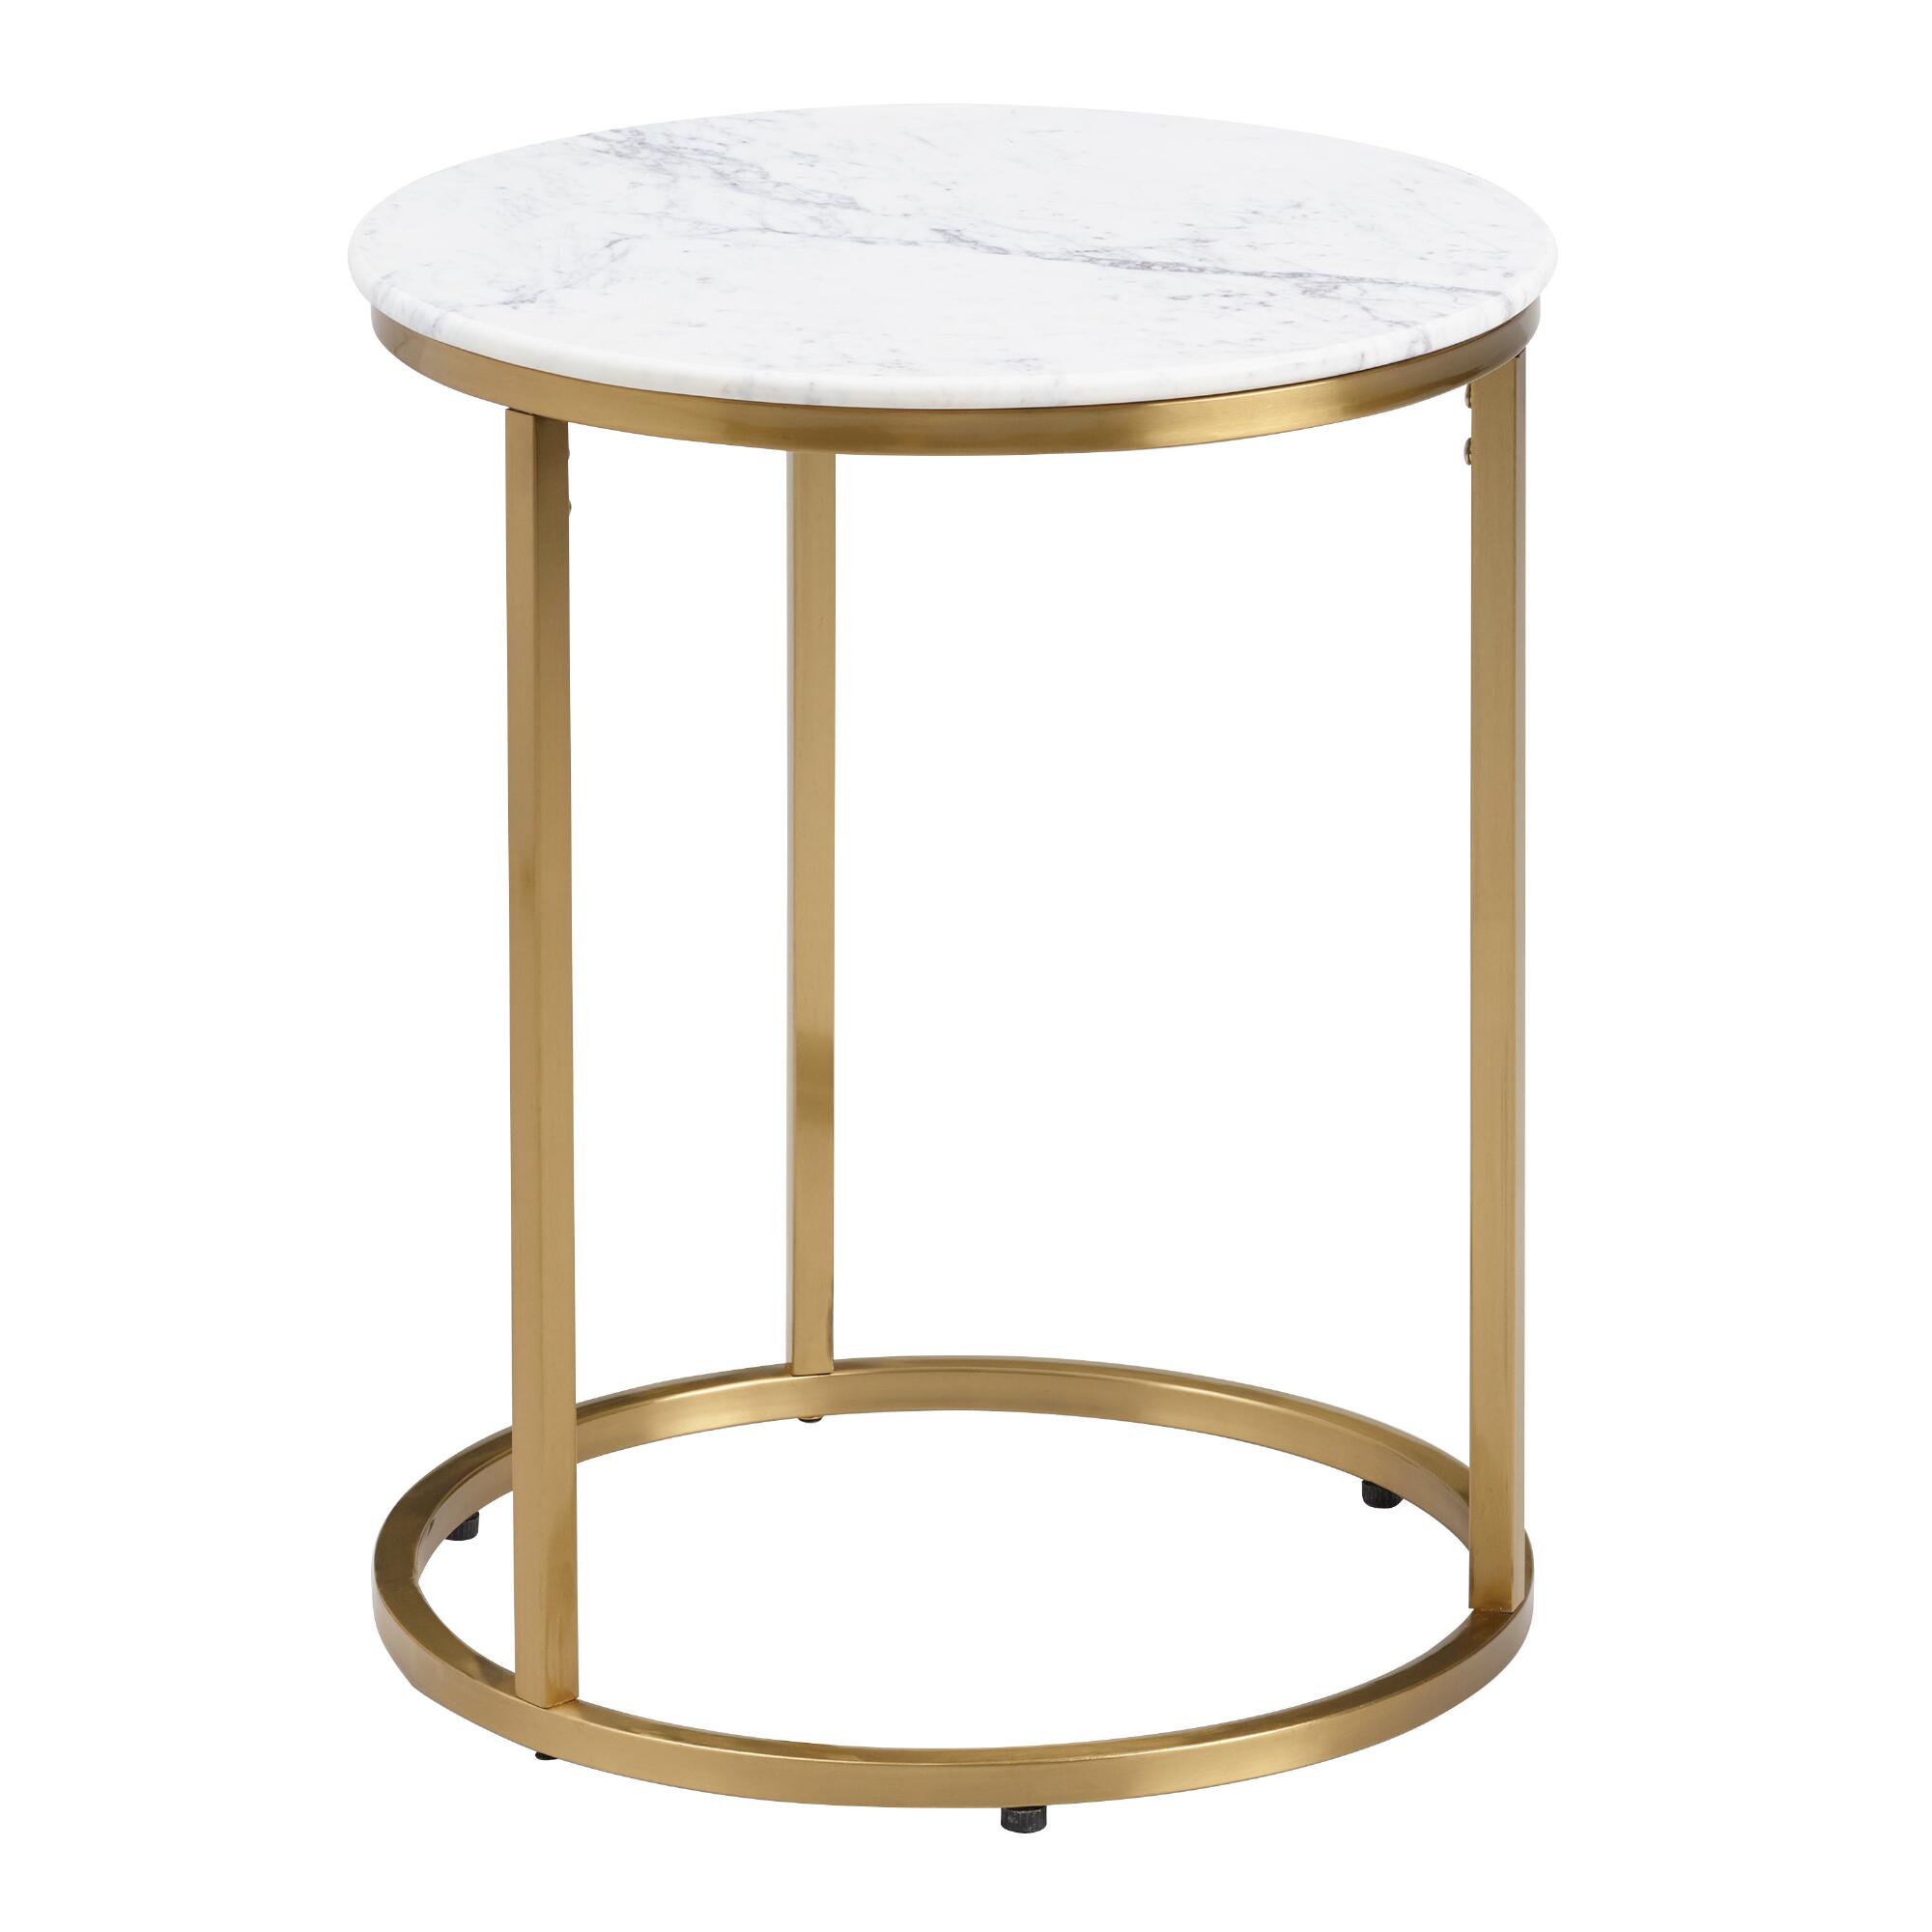 Round White Marble Milan Accent Table by World Market